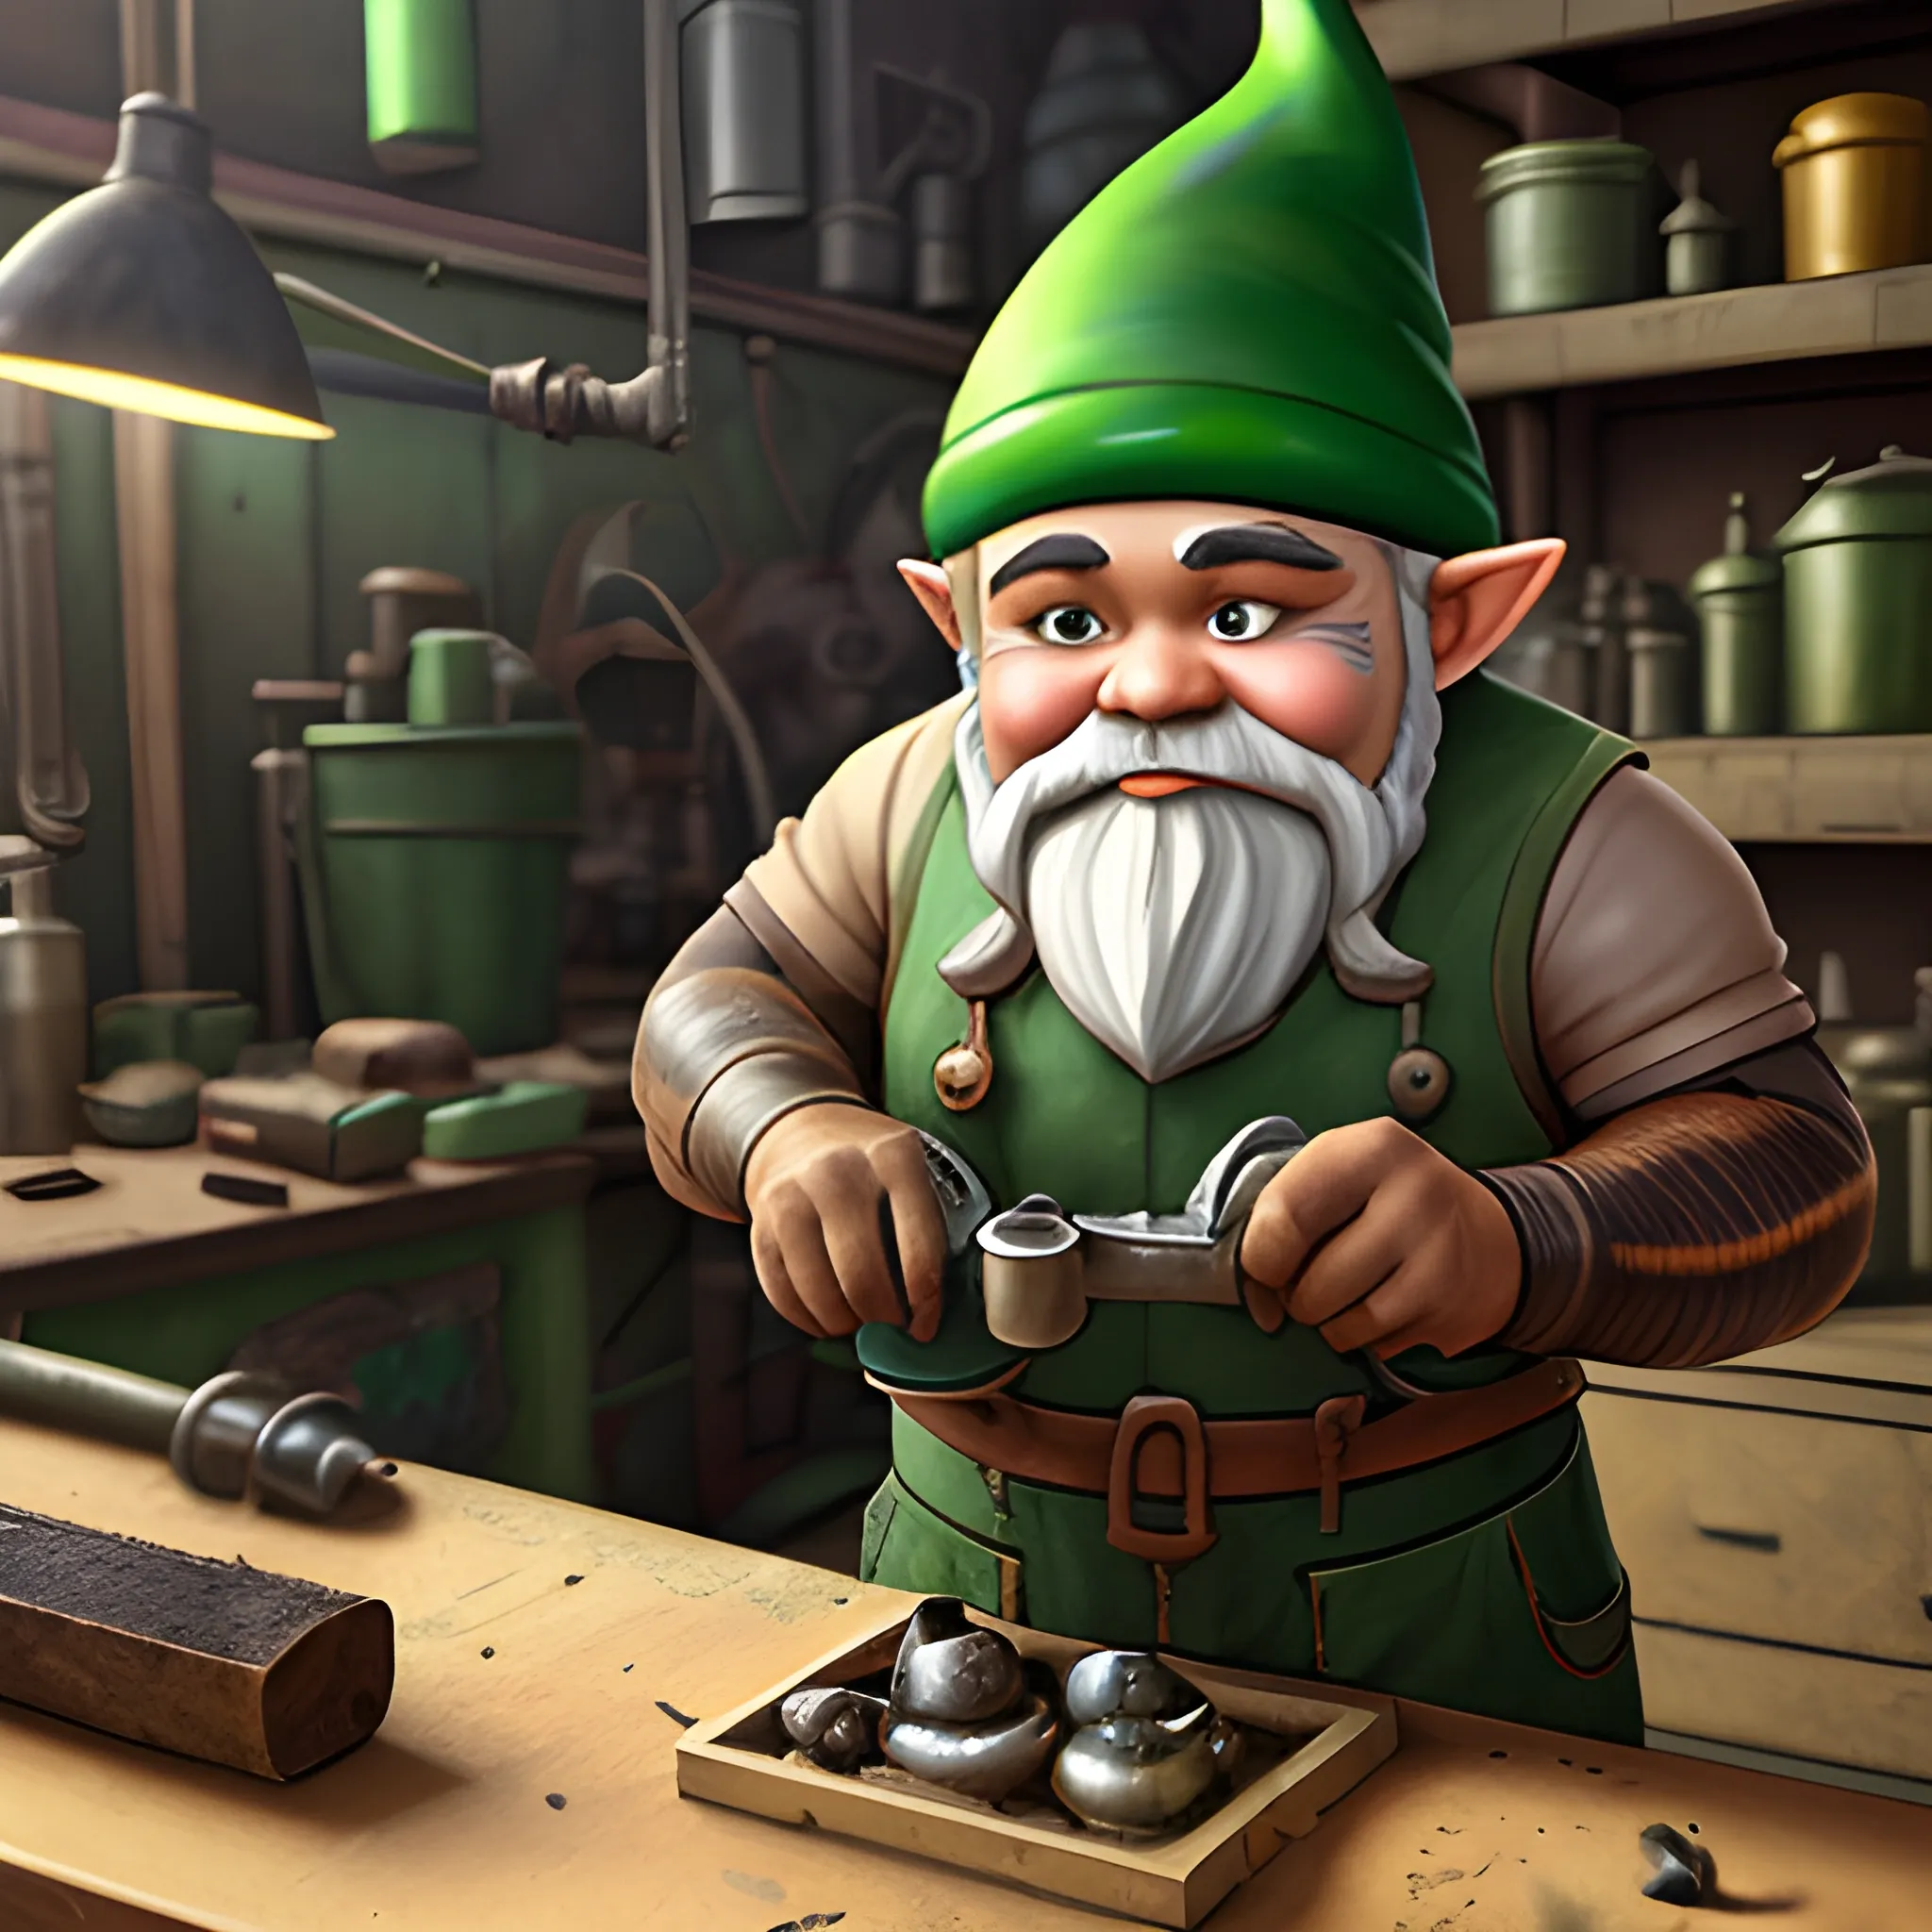 male gnome artificer with "brown skin" and "green hair" working in a dirty machine shop, Realistic
